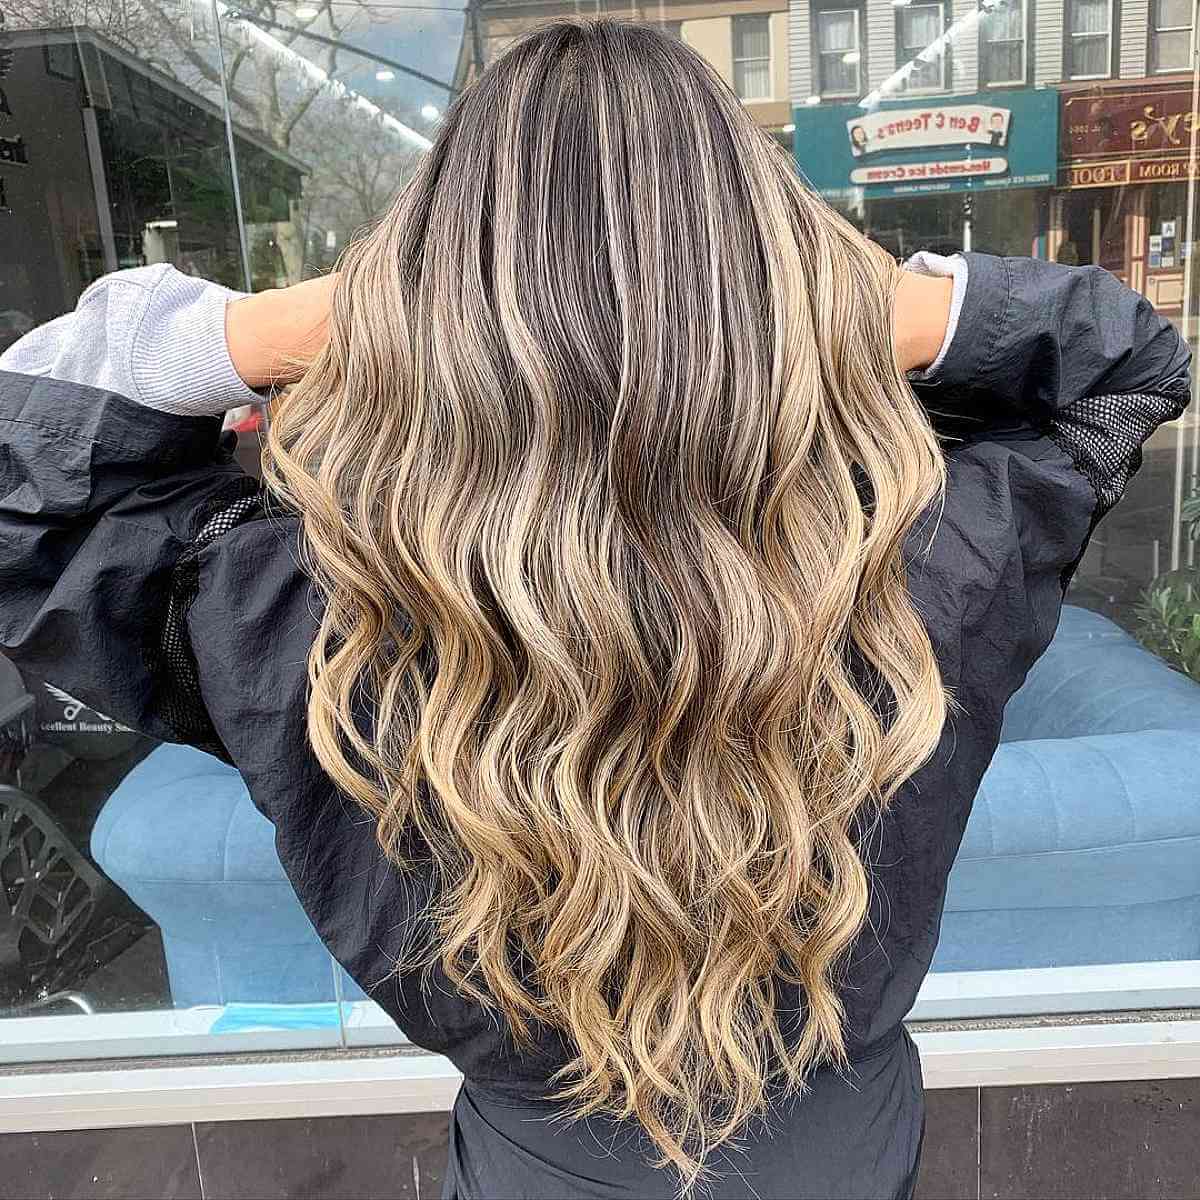 Long V-Shape Layered Cut with Waves